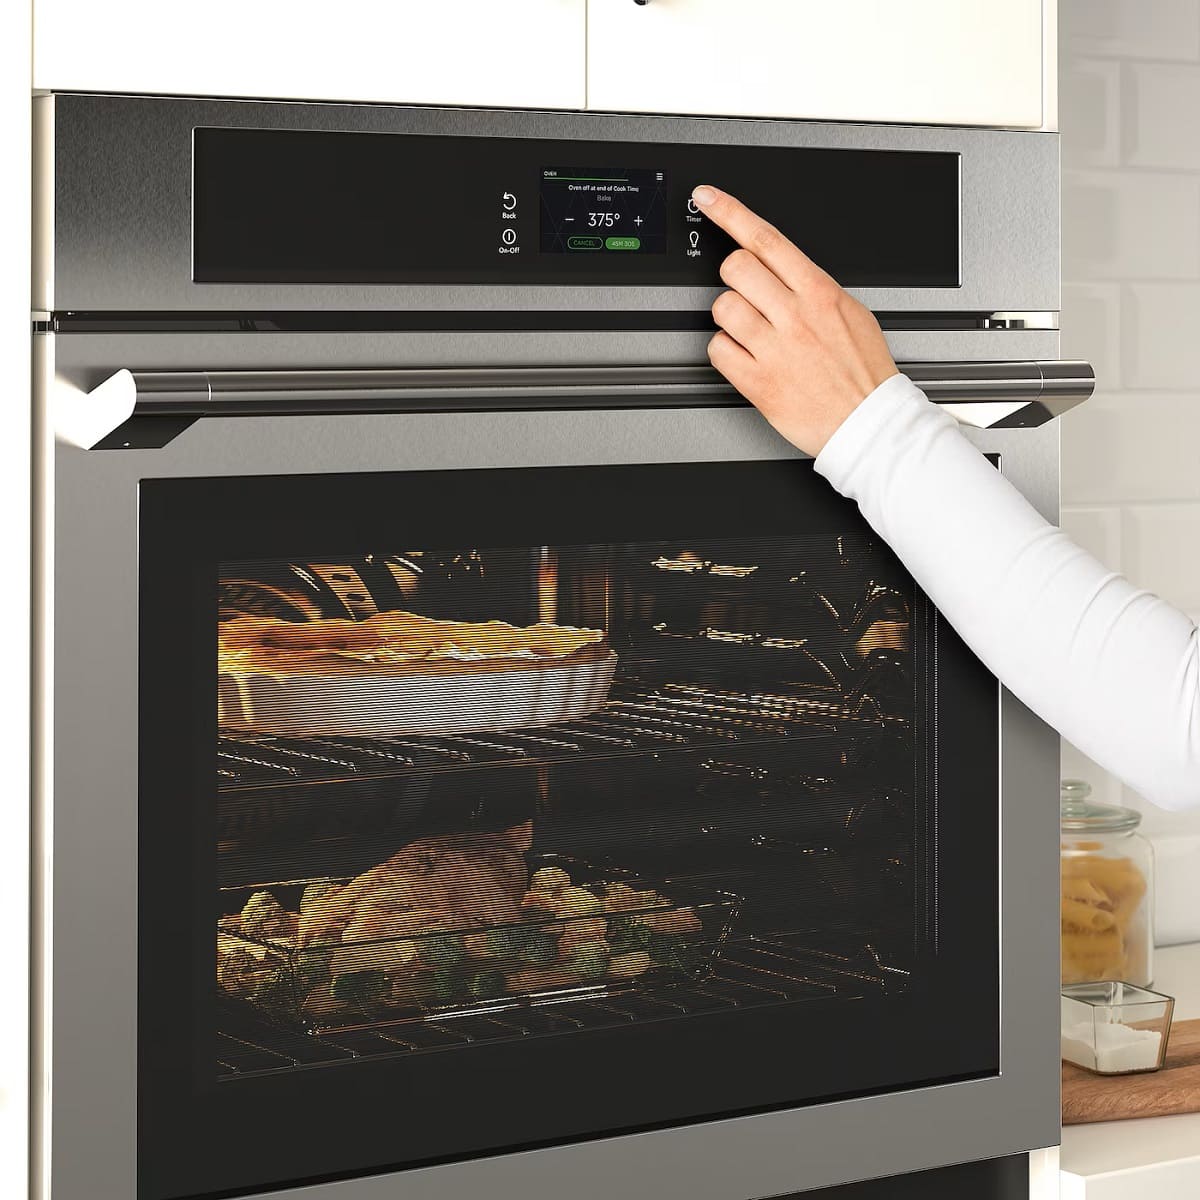 8 Amazing Self Cleaning Wall Ovens for 2023